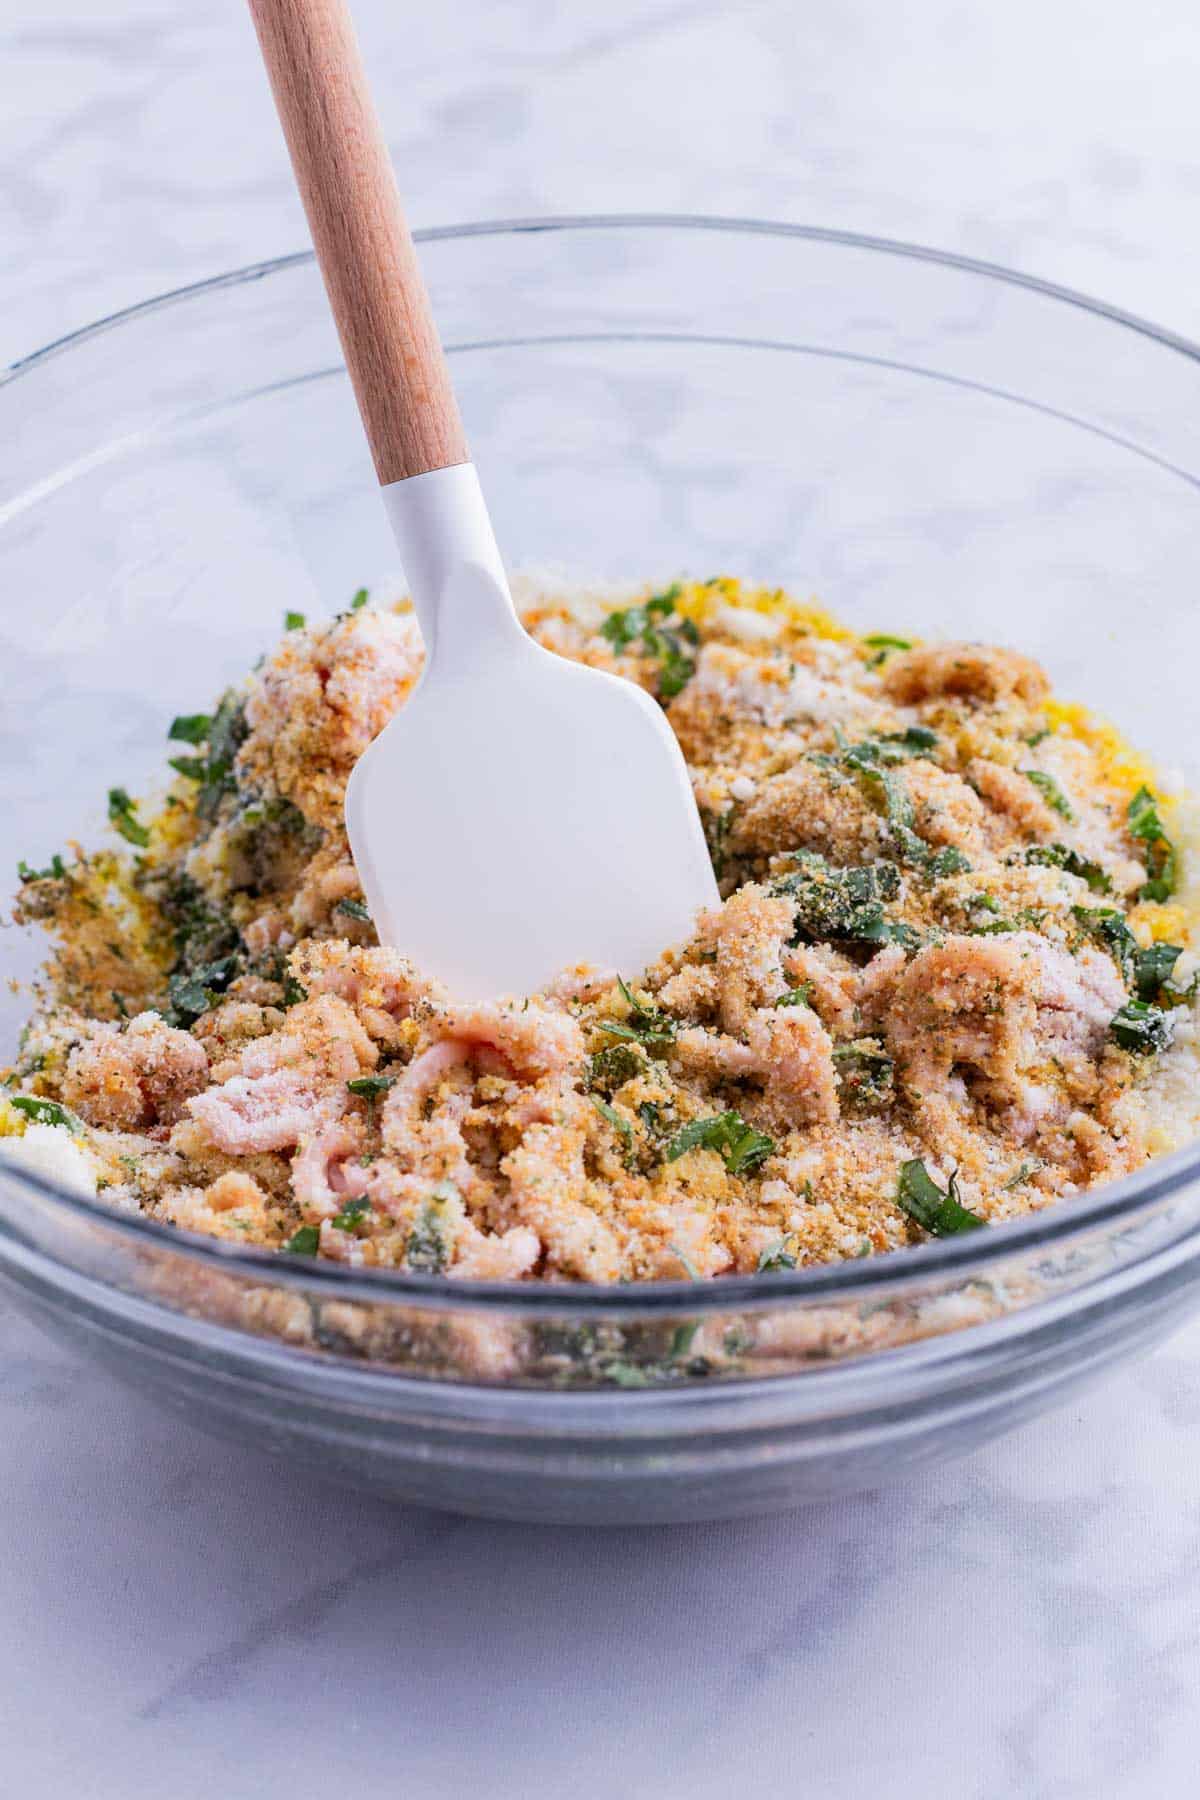 A spatula stirs a ground chicken mixture in a glass bowl.